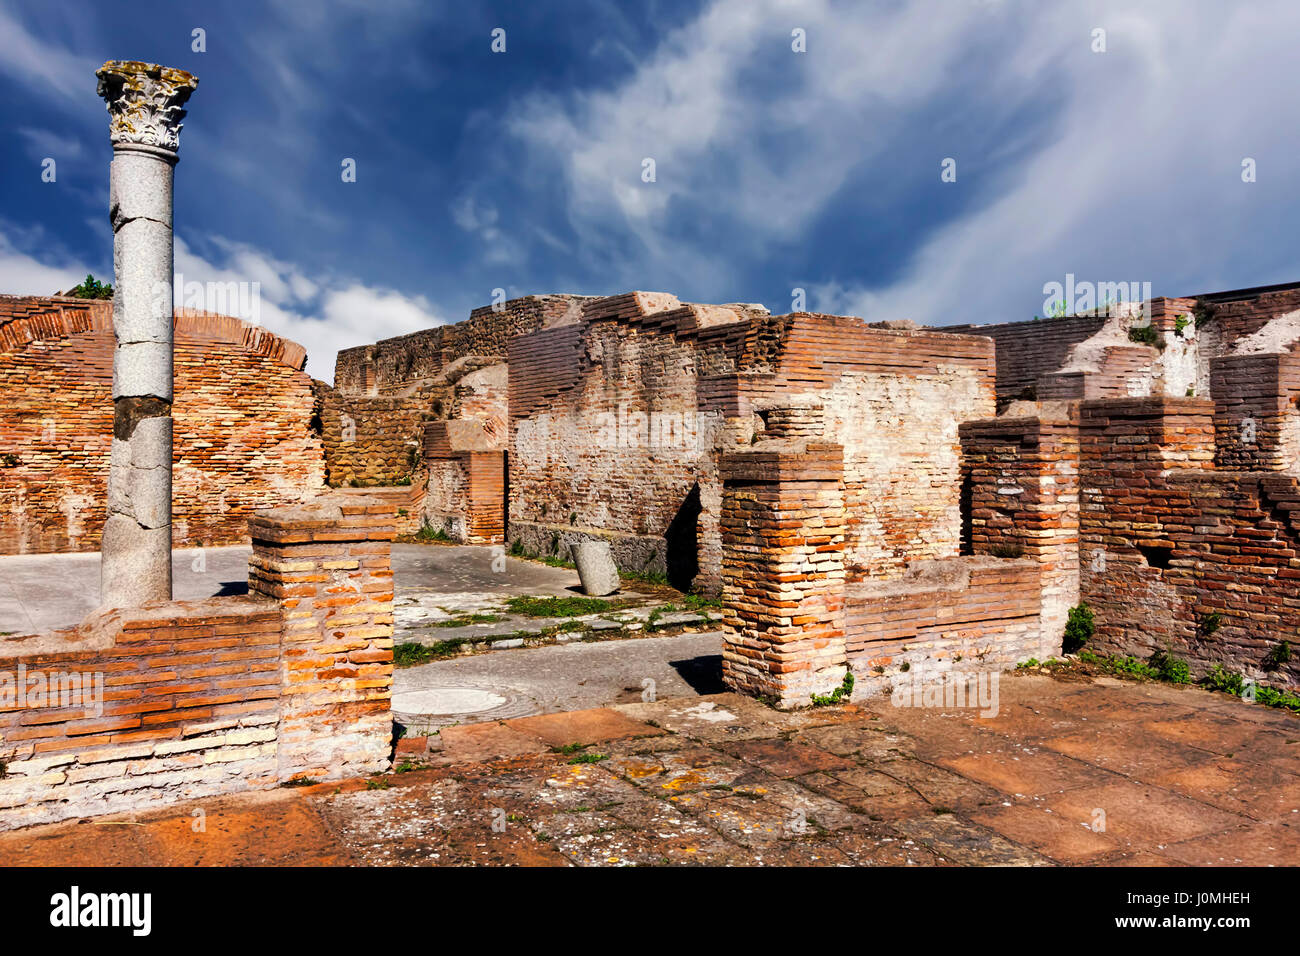 Archaeological Roman site in Ostia Antica - Italy Stock Photo